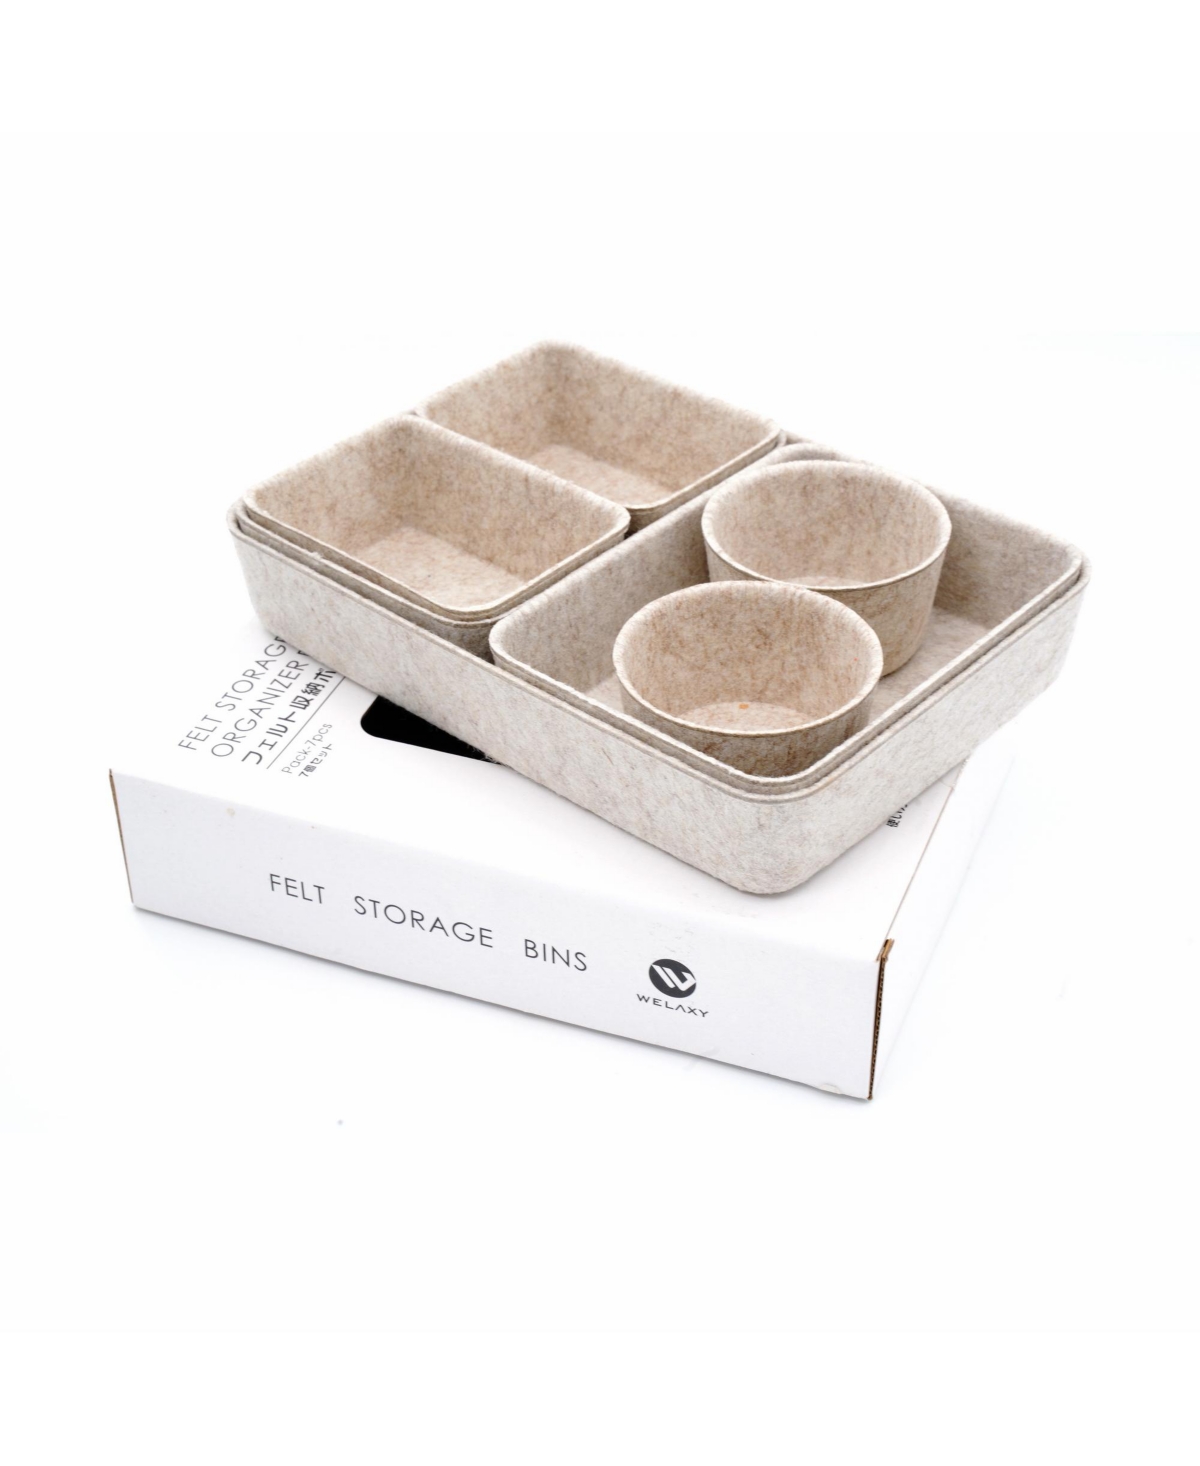 Welaxy 7 Piece Felt Drawer Organizer Set With Round Cups And Trays In Oatmeal